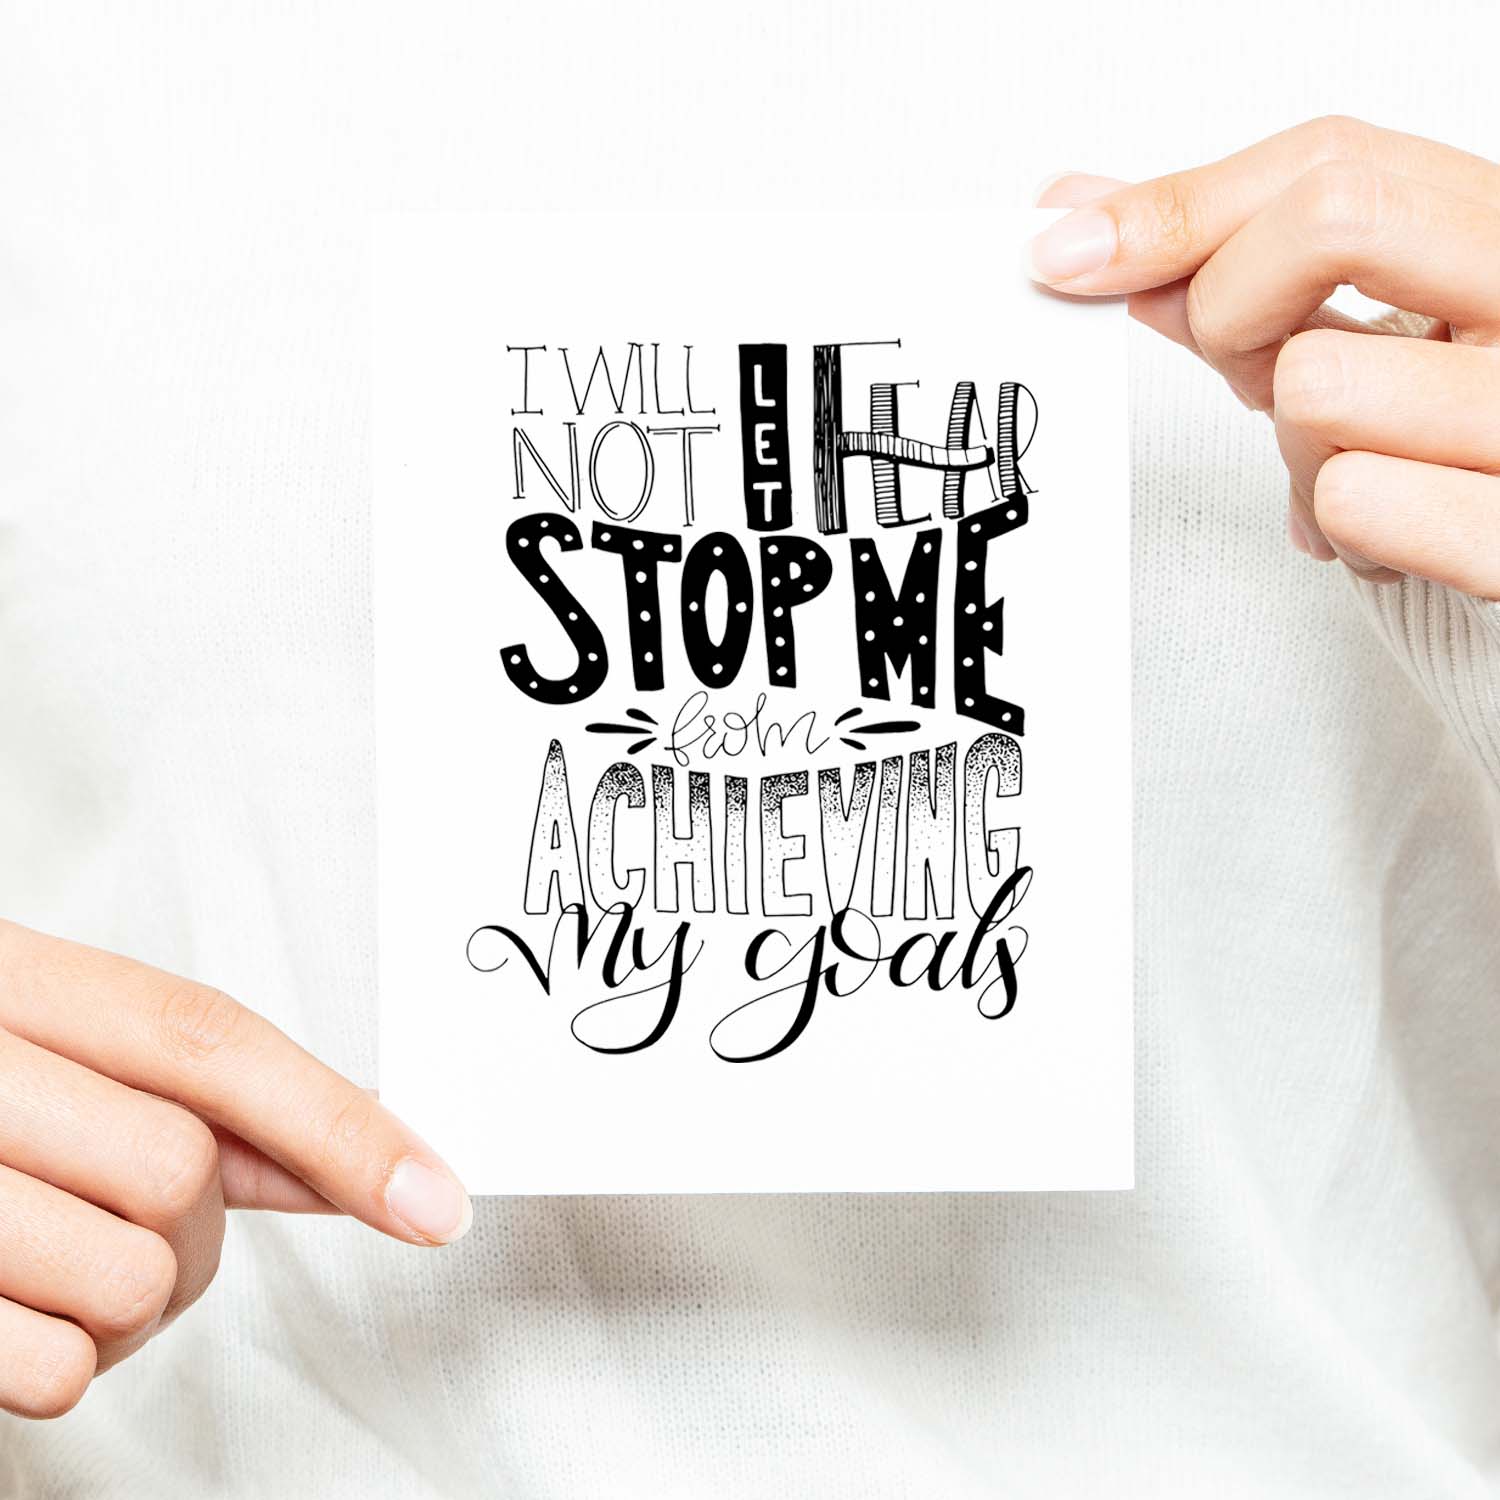 I will not let fear stop me from achieving my goals hand lettered black and white greeting card on a white folded card with A2 envelope shown with a woman in a white sweater holding card